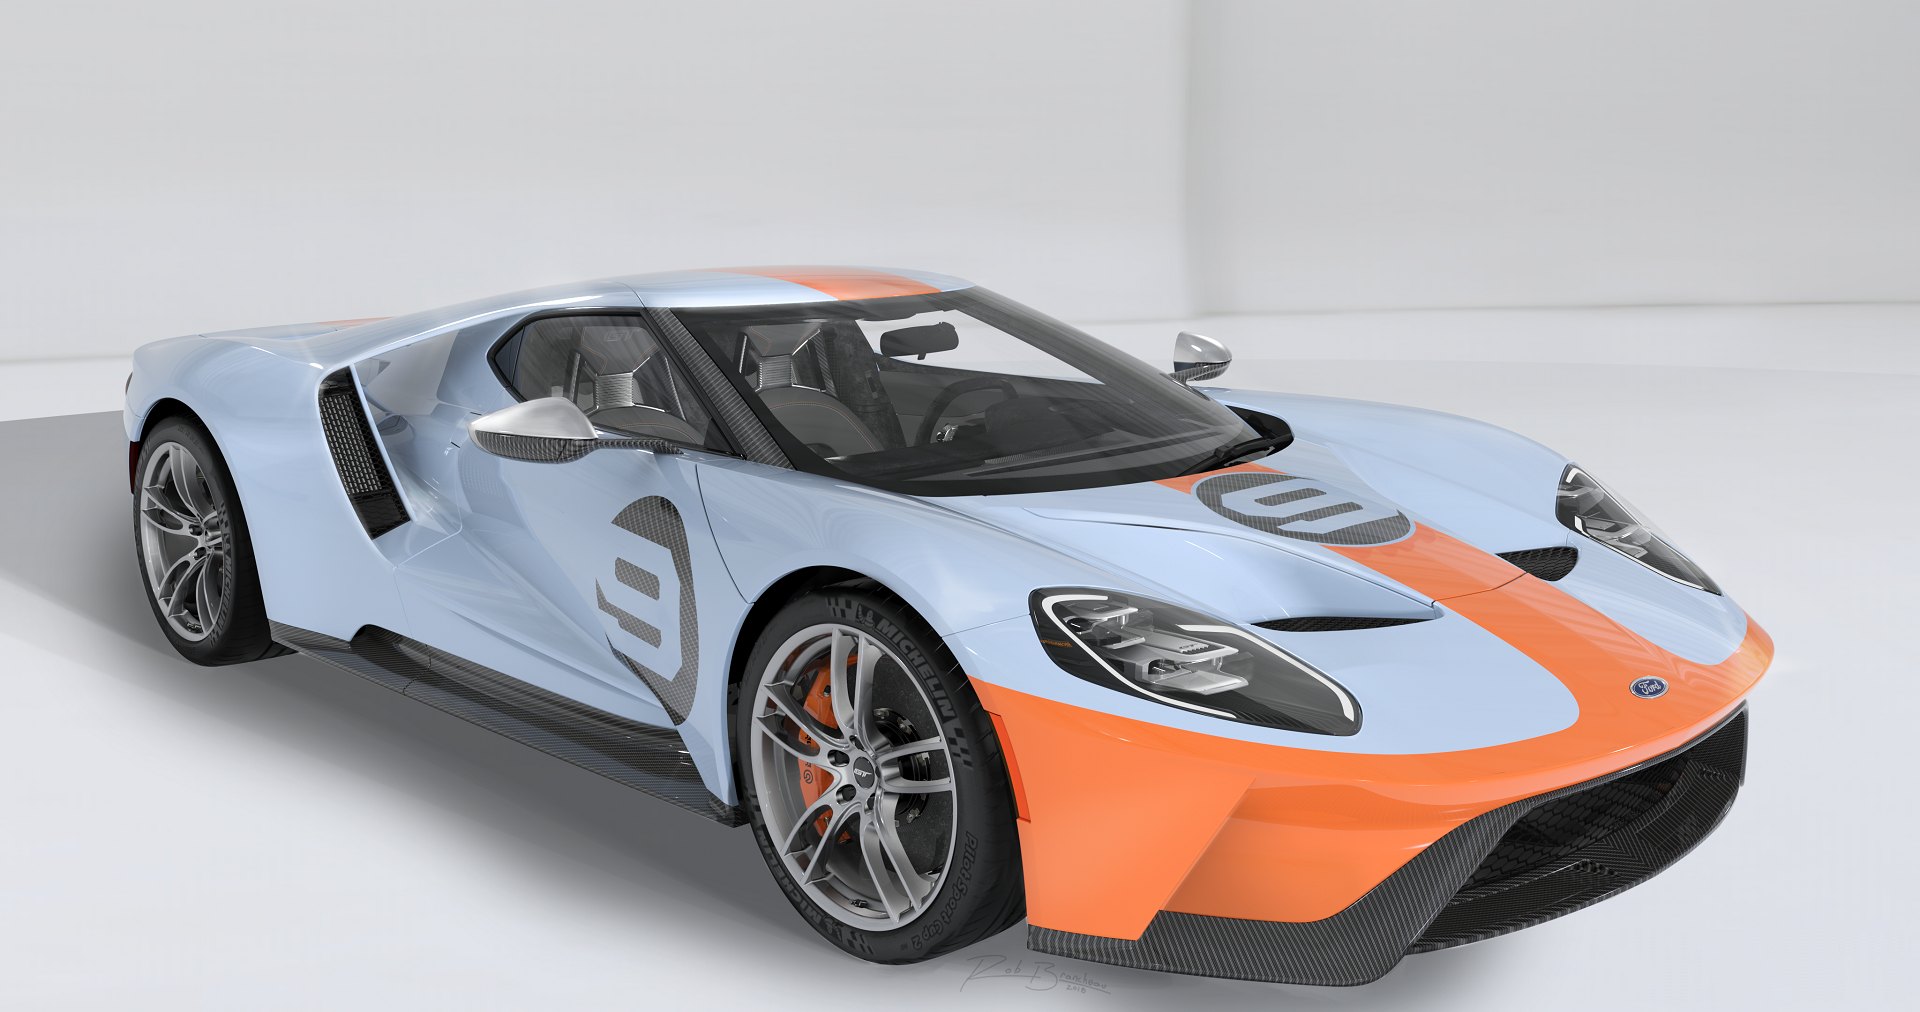 2019 Ford GT Heritage Edition VIN 001 Is Headed to Auction for Charity